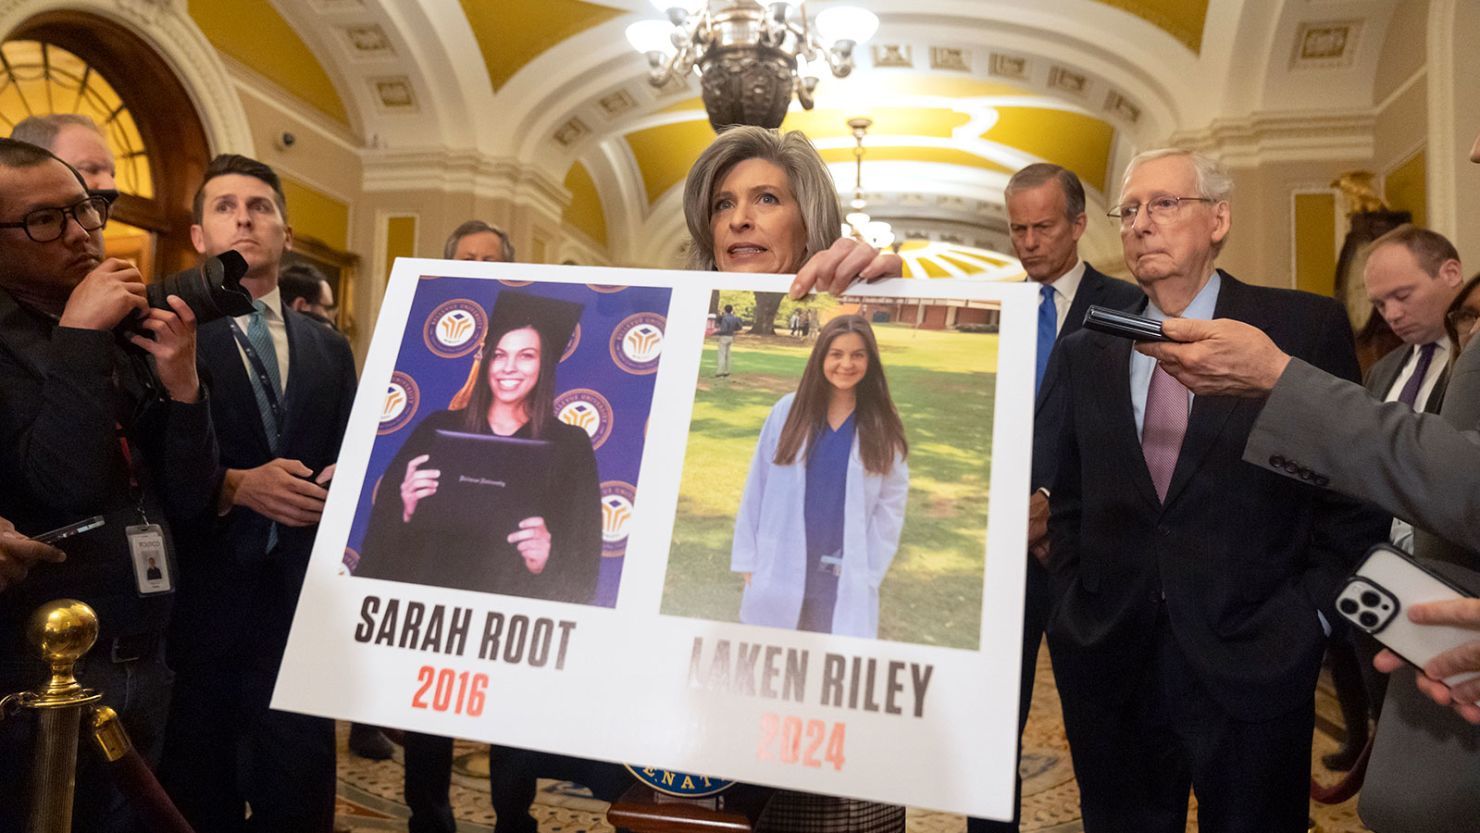 Republican Sen. Joni Ernst of Iowa holds a poster with photos of murder victims Sarah Root and Laken Riley as she speaks on Capitol Hill, February 27, 2024, in Washington, DC.